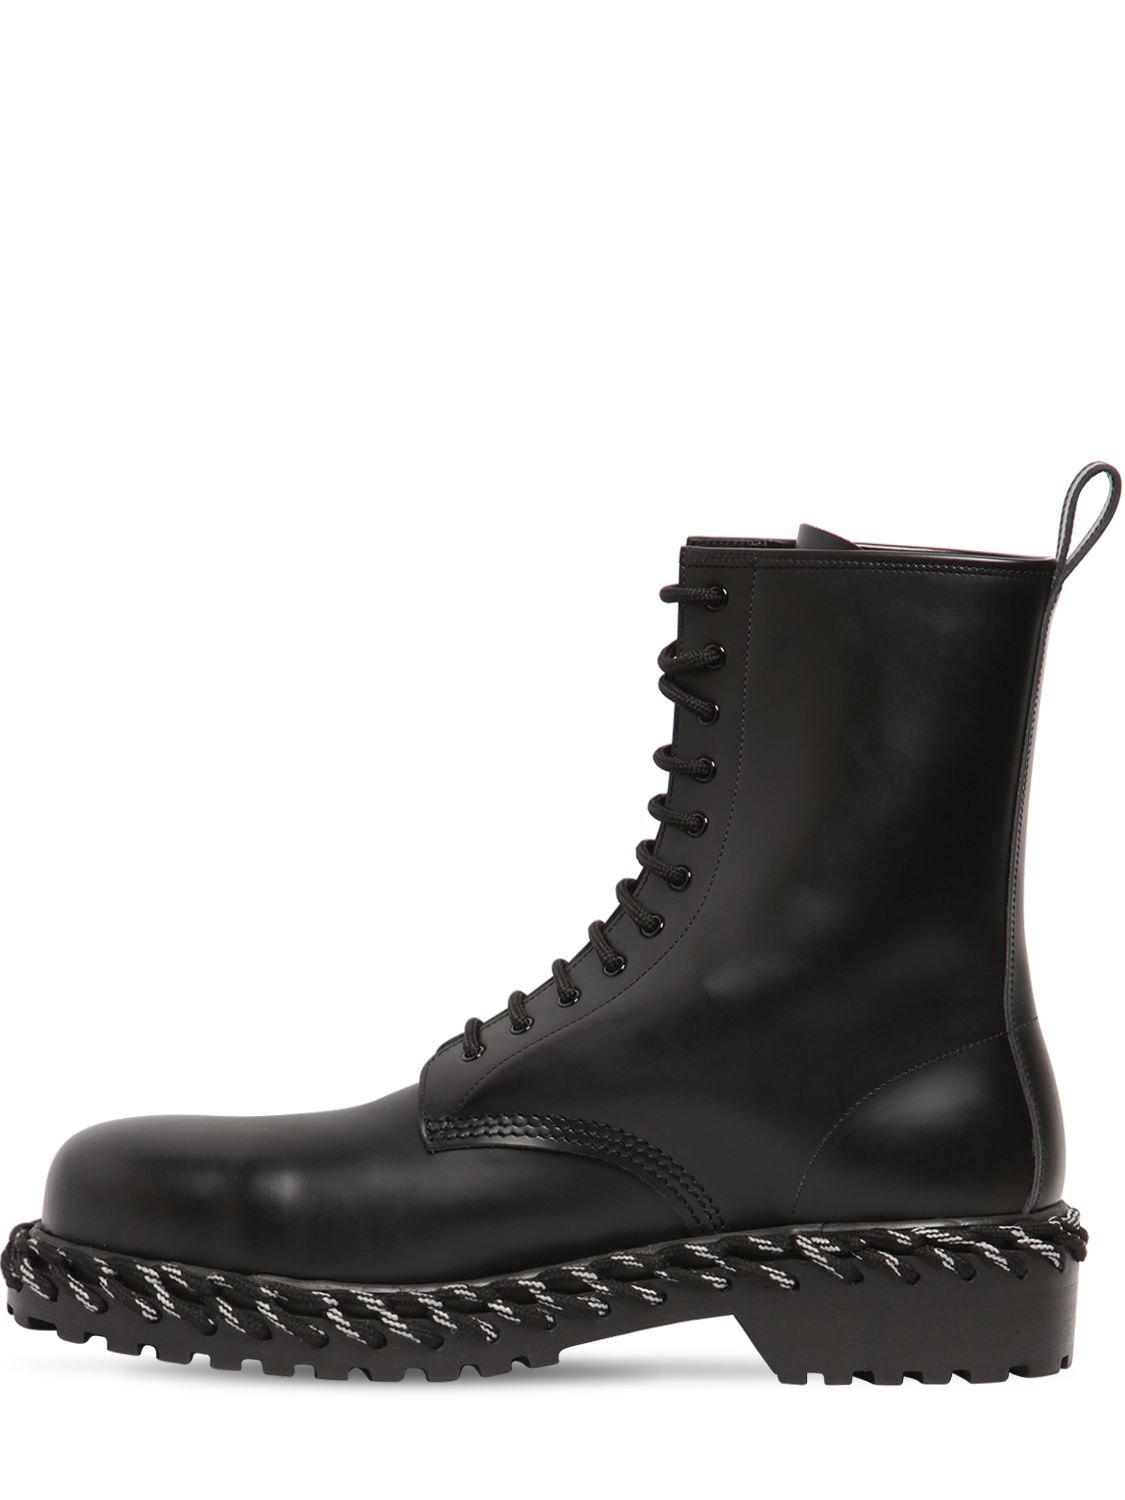 Balenciaga Lace Detail Military Boots in Black for Men - Lyst